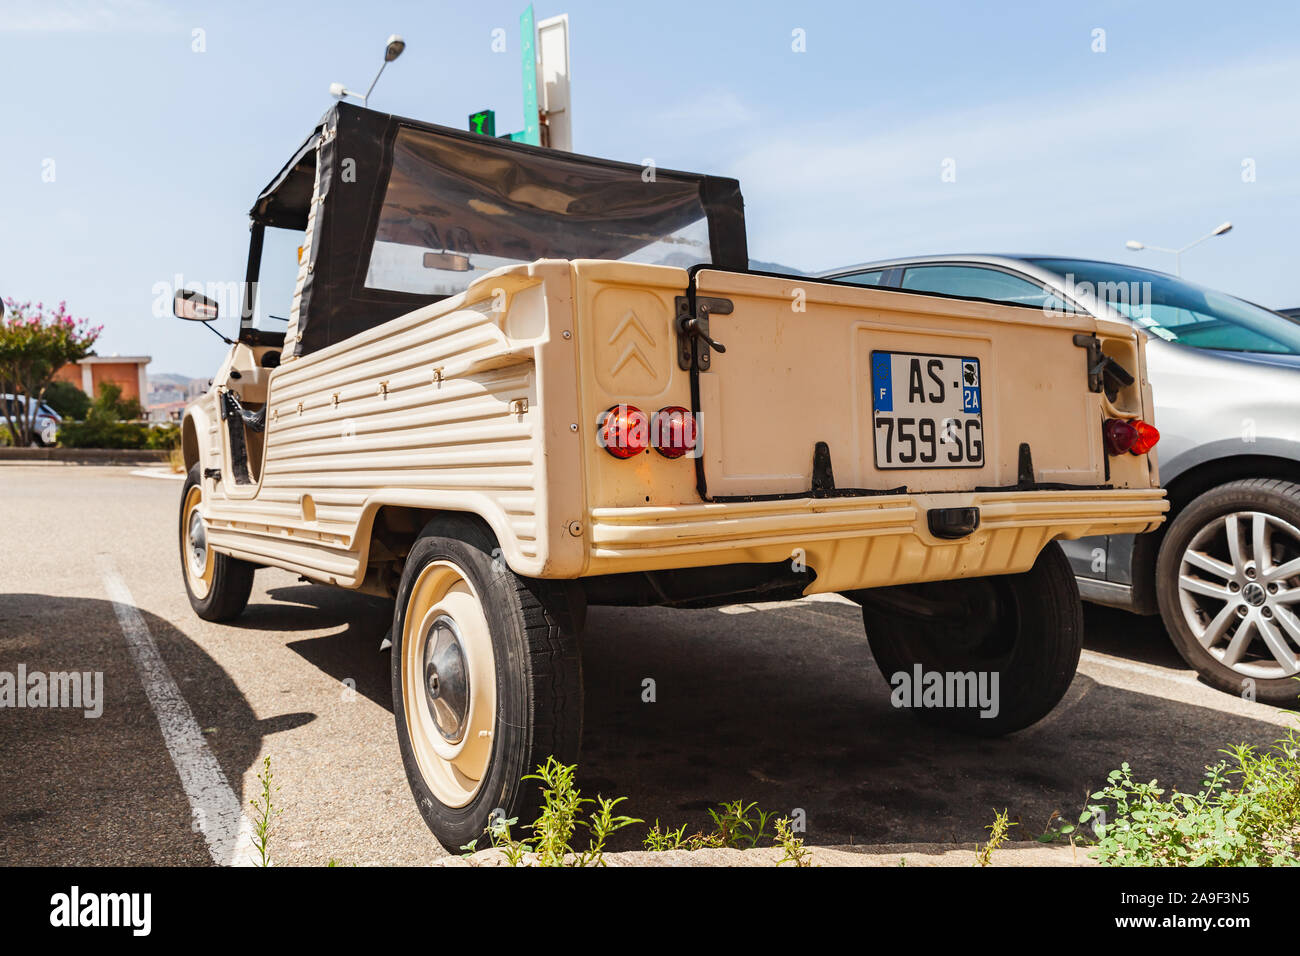 Ajaccio, France - August 25, 2018: Beige Citroen Mehari car stands parked on a street in France, rear view, close-up photo Stock Photo